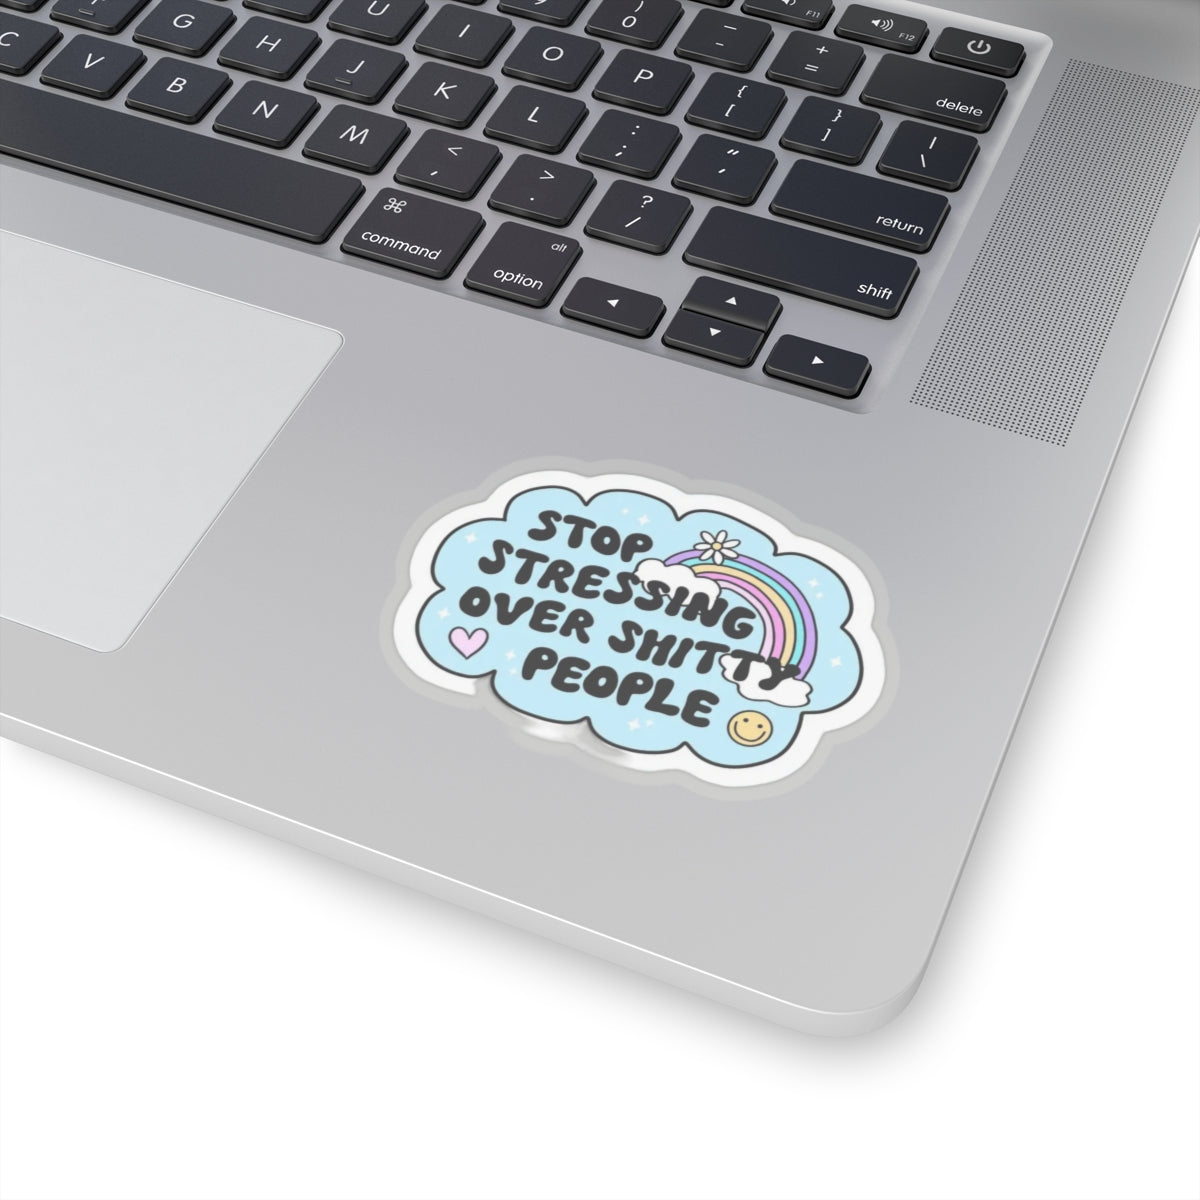 Stop stressing over shitty people Sticker